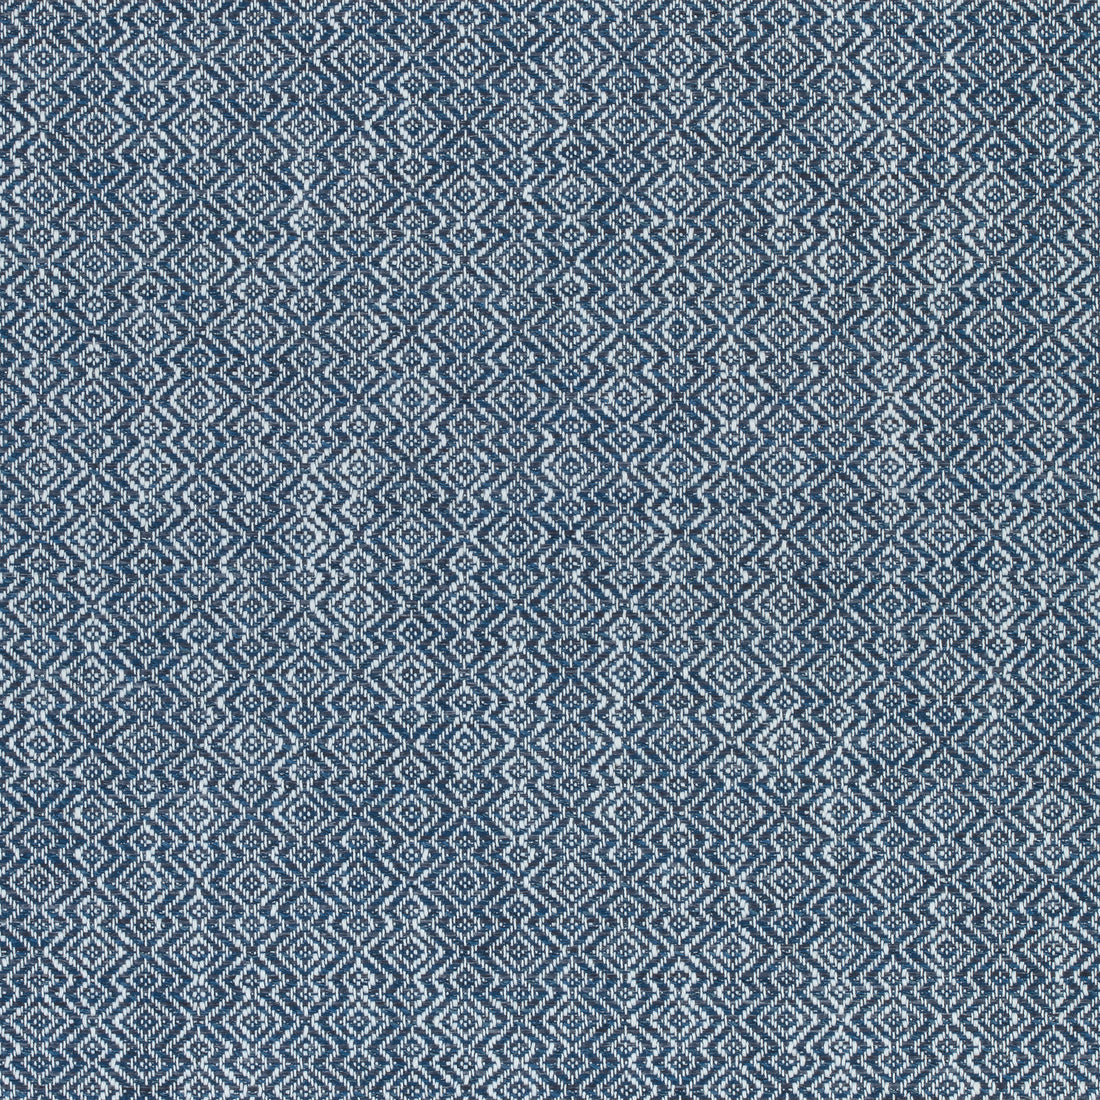 Kingsley fabric in navy color - pattern number W74071 - by Thibaut in the Cadence collection